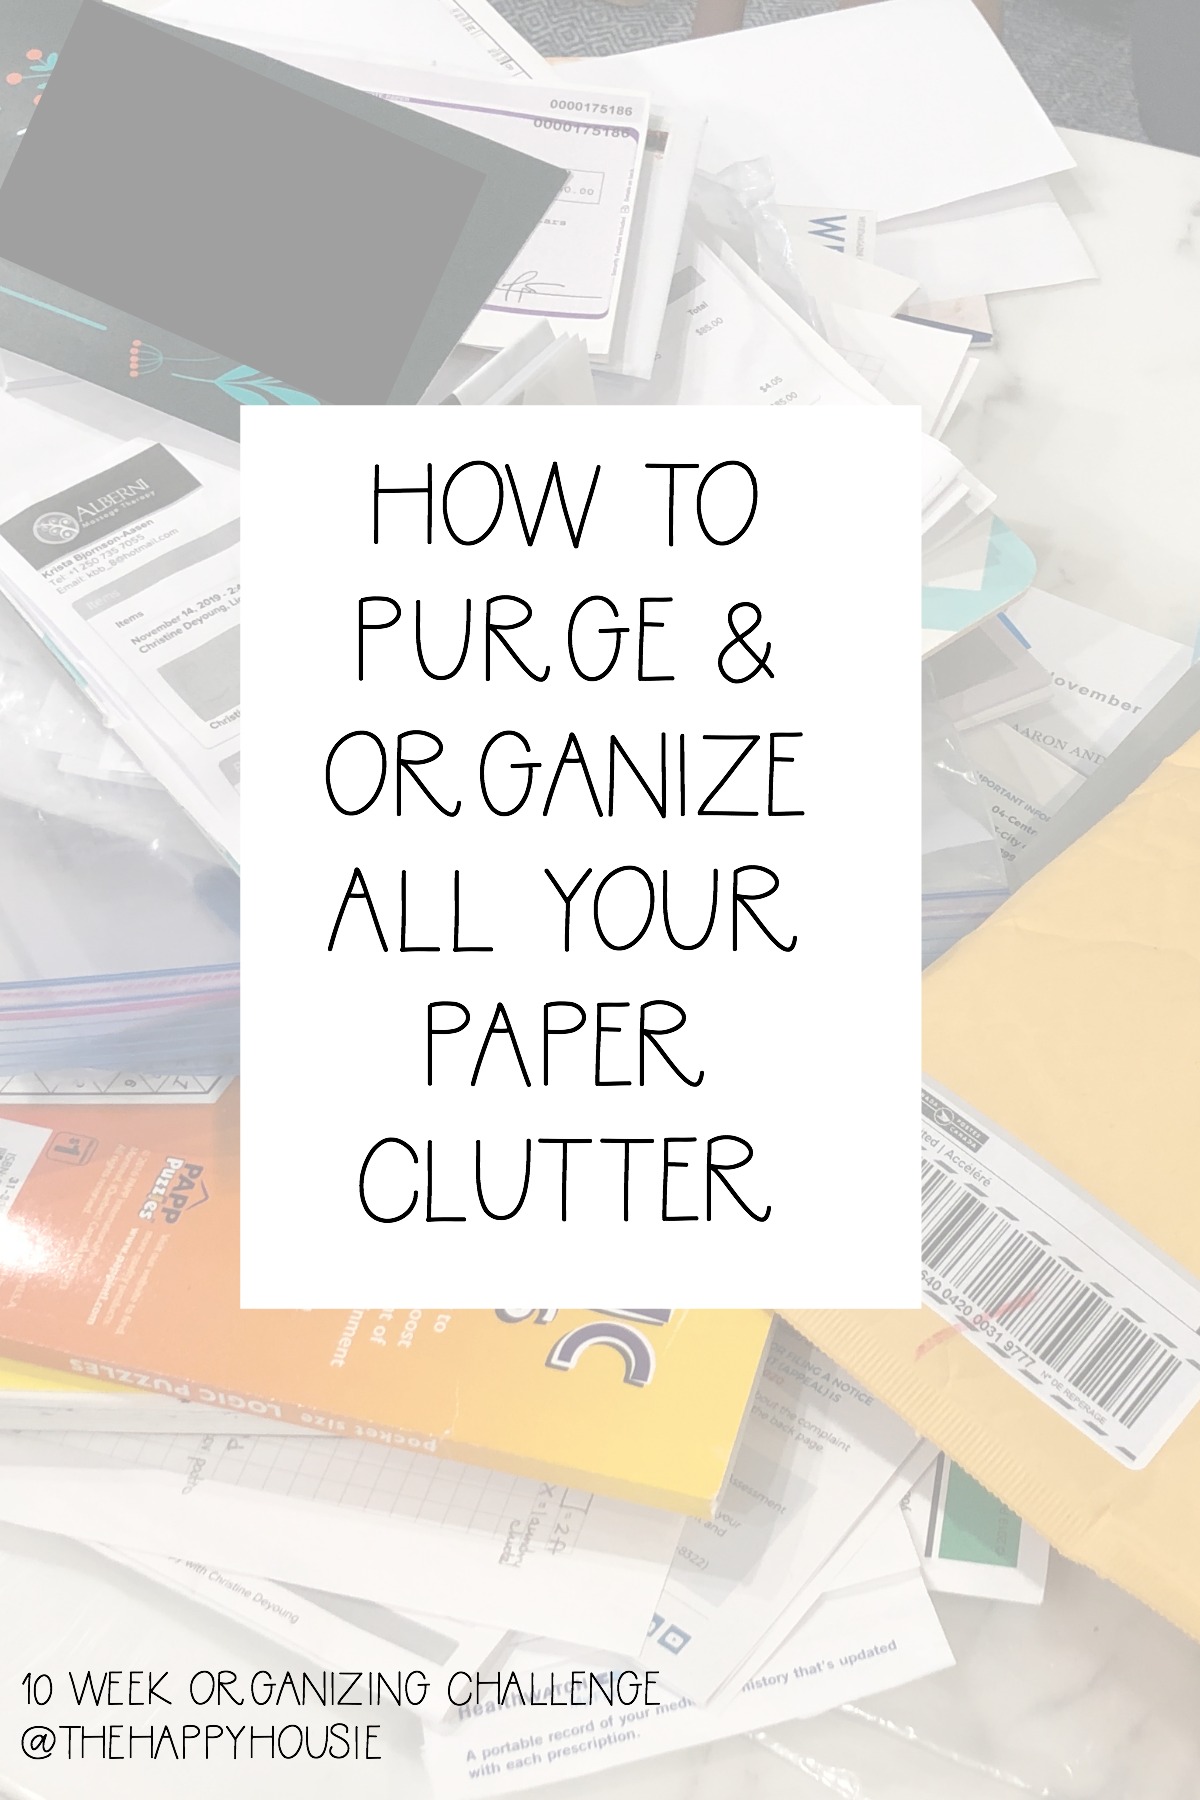 Image of paperwork and label saying how to purge and organize your paper clutter.